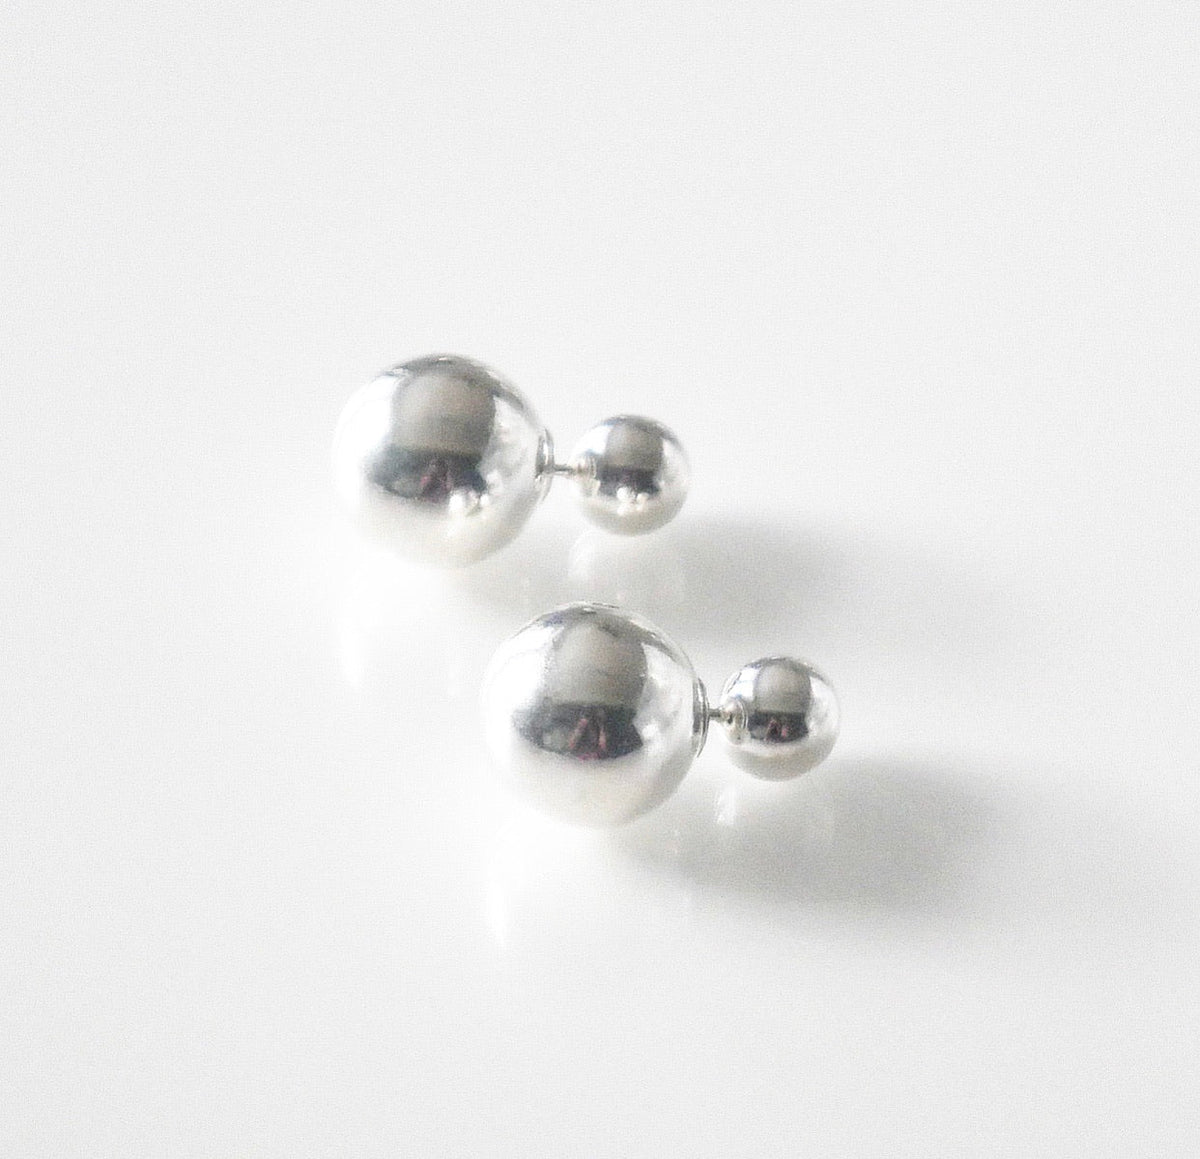 Ball earrings ball front and back earrings sterling silver .925 designer inspired prada and chanel style earrings gift ideas cool trending popular unique for men and woman trending instagram and tiktok famous brands Kesley Boutique 